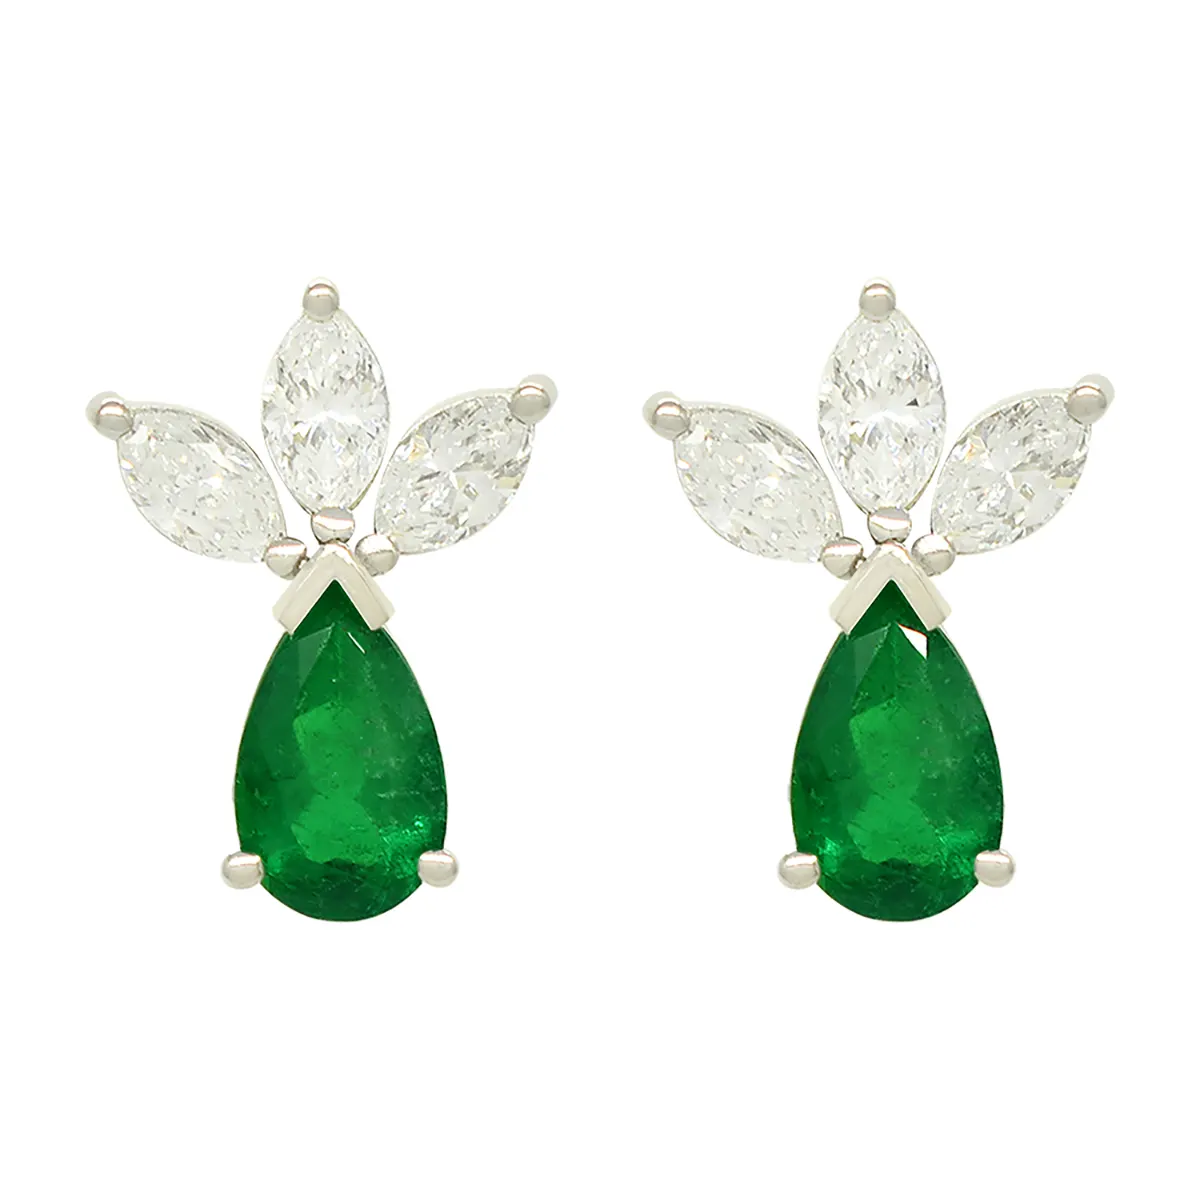 Emerald and Diamond Earrings in 18K White Gold With Pear Emeralds and Marquise Diamonds